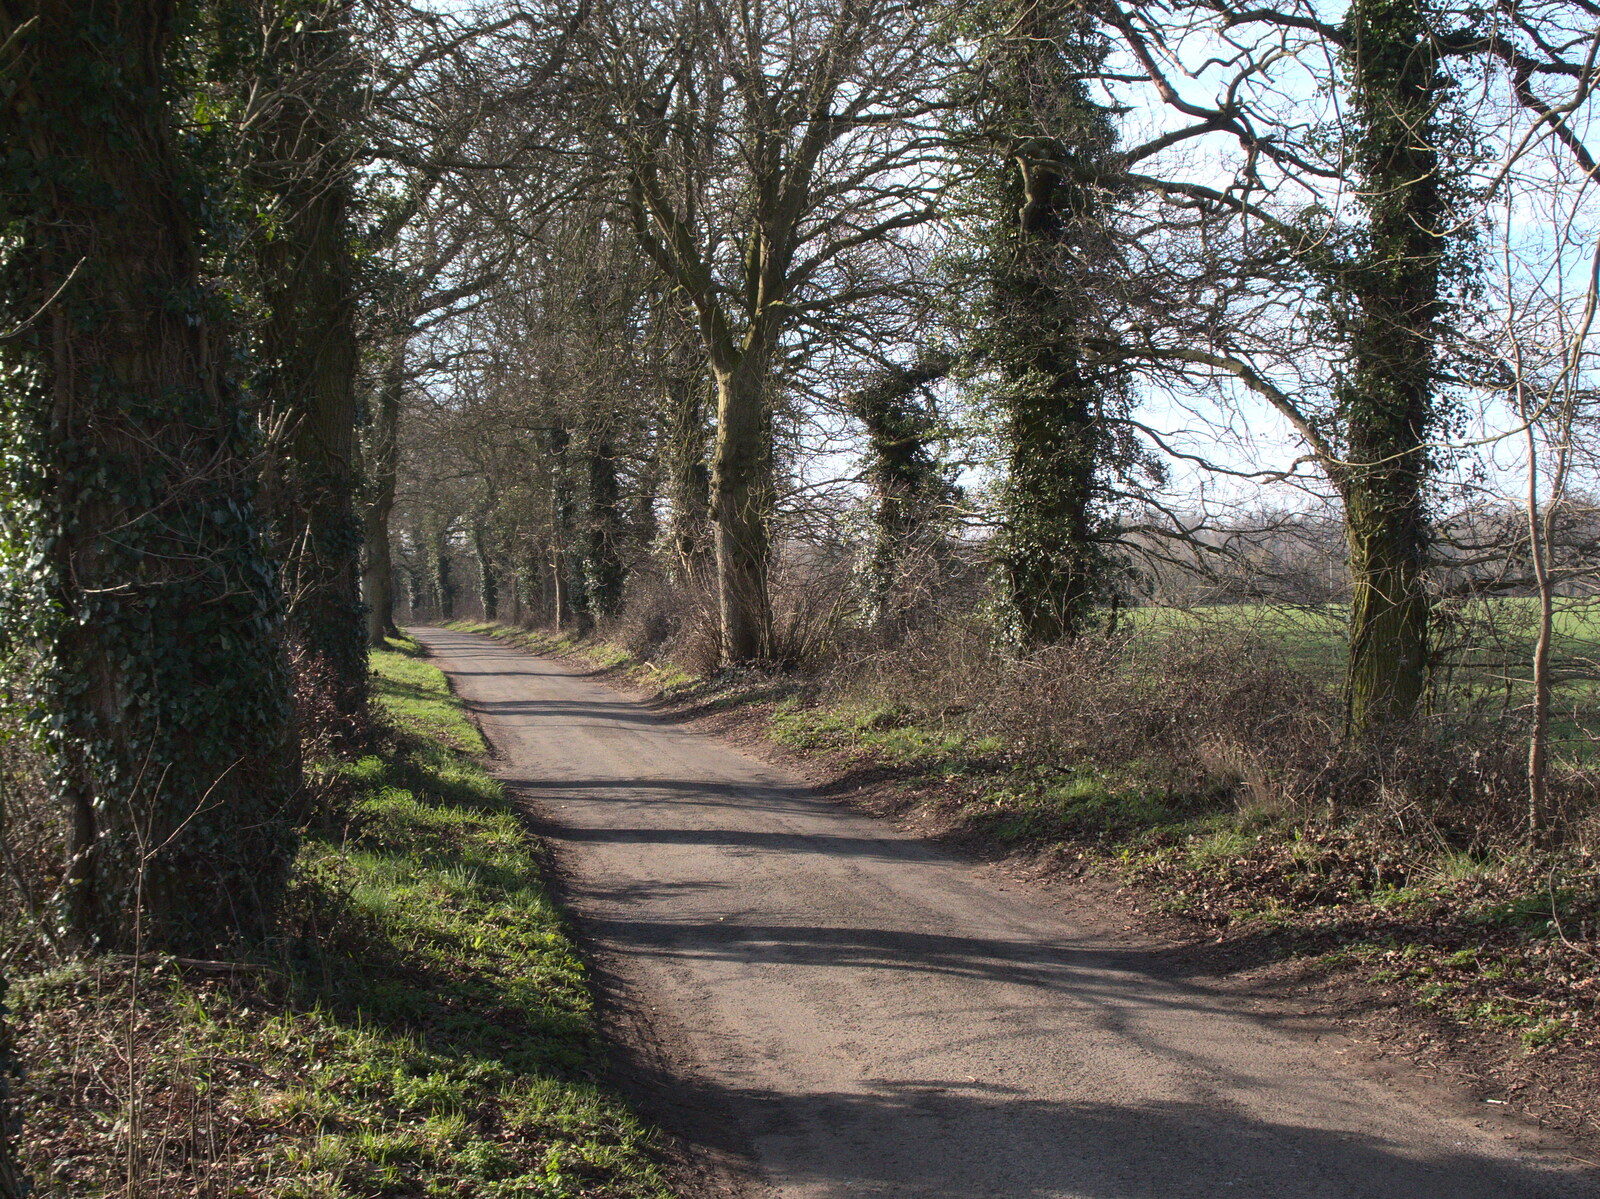 The road to Thornham Parva from A Vaccine Postcard from Harleston, Norfolk - 22nd March 2021